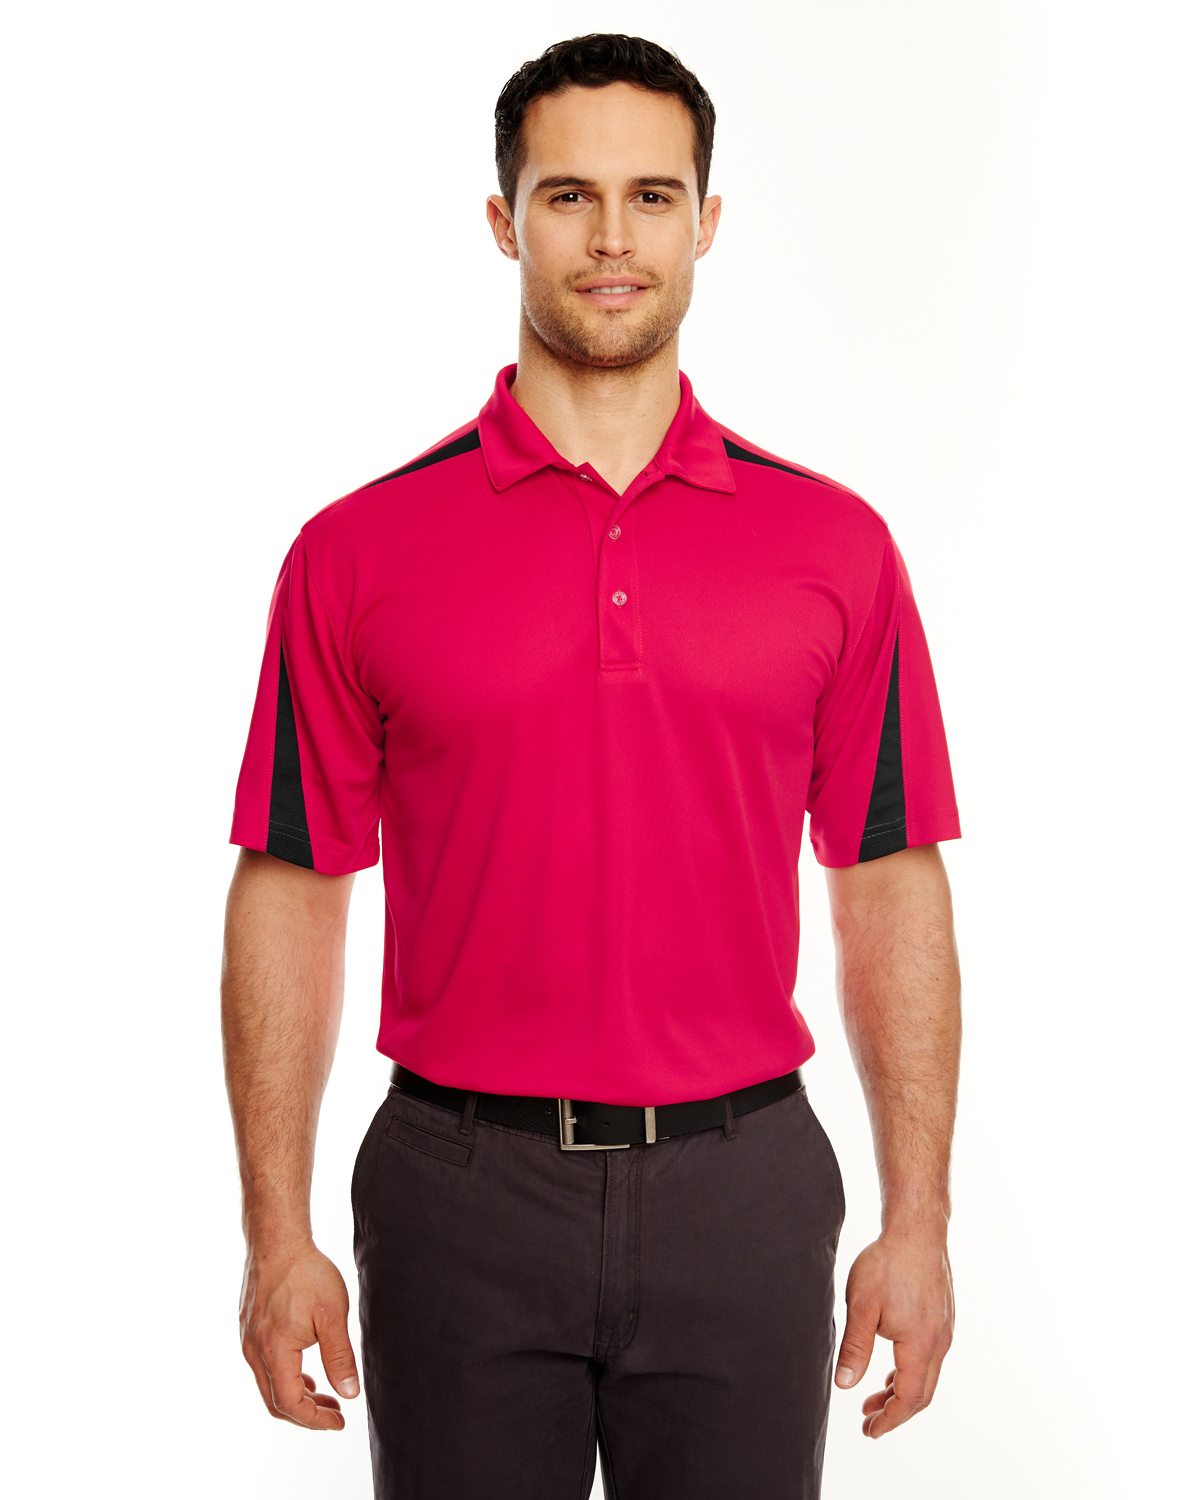 8408 UltraClub Adult Cool & Dry Sport Polo $17.09 - Sports Shirts